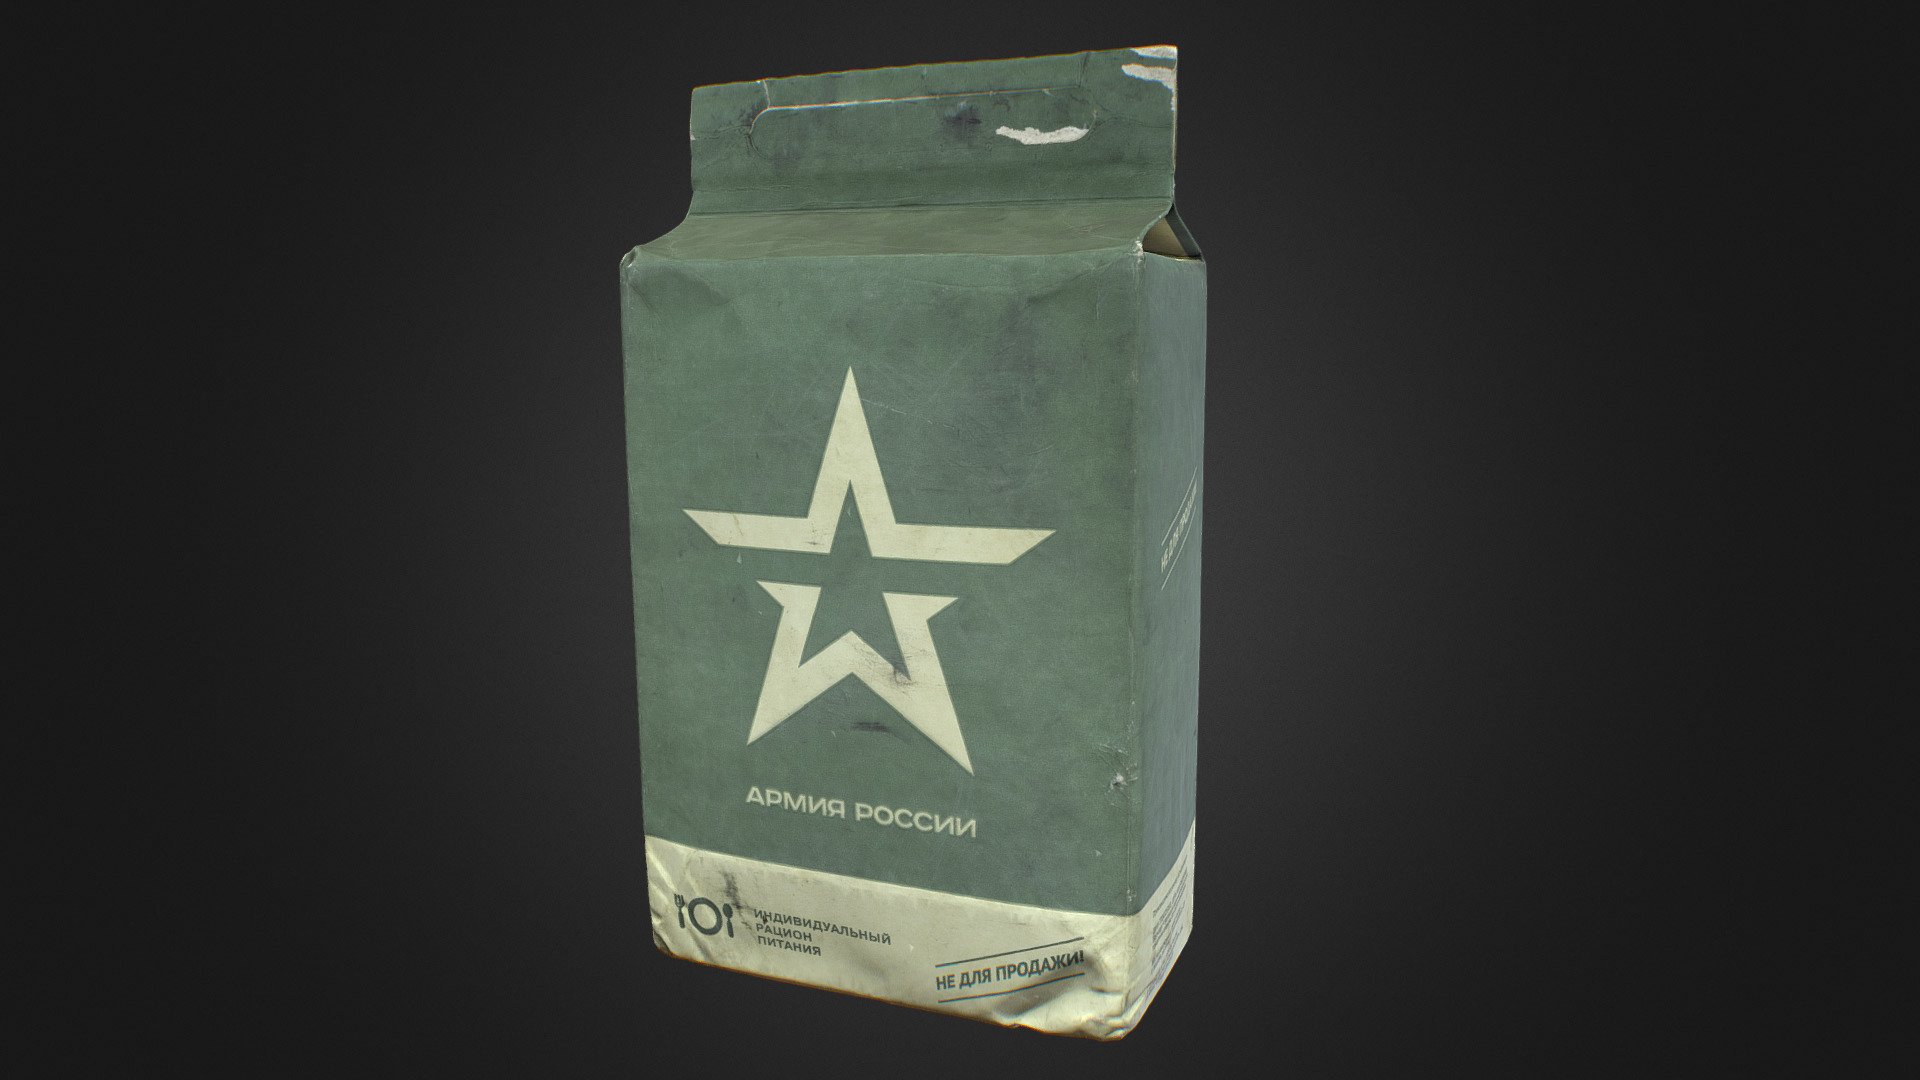 Russian orc food. Pig-dog dry ration, trophy!

MRE Russian army individual ration food daily 24 hours. Scan High Poly

Including OBJ formats and texture (8192x8192) JPG

Polygons: 101976 Vertices: 50488 - MRE Russian army individual ration food - 3D model by Skeptic (@texturus) 3d model